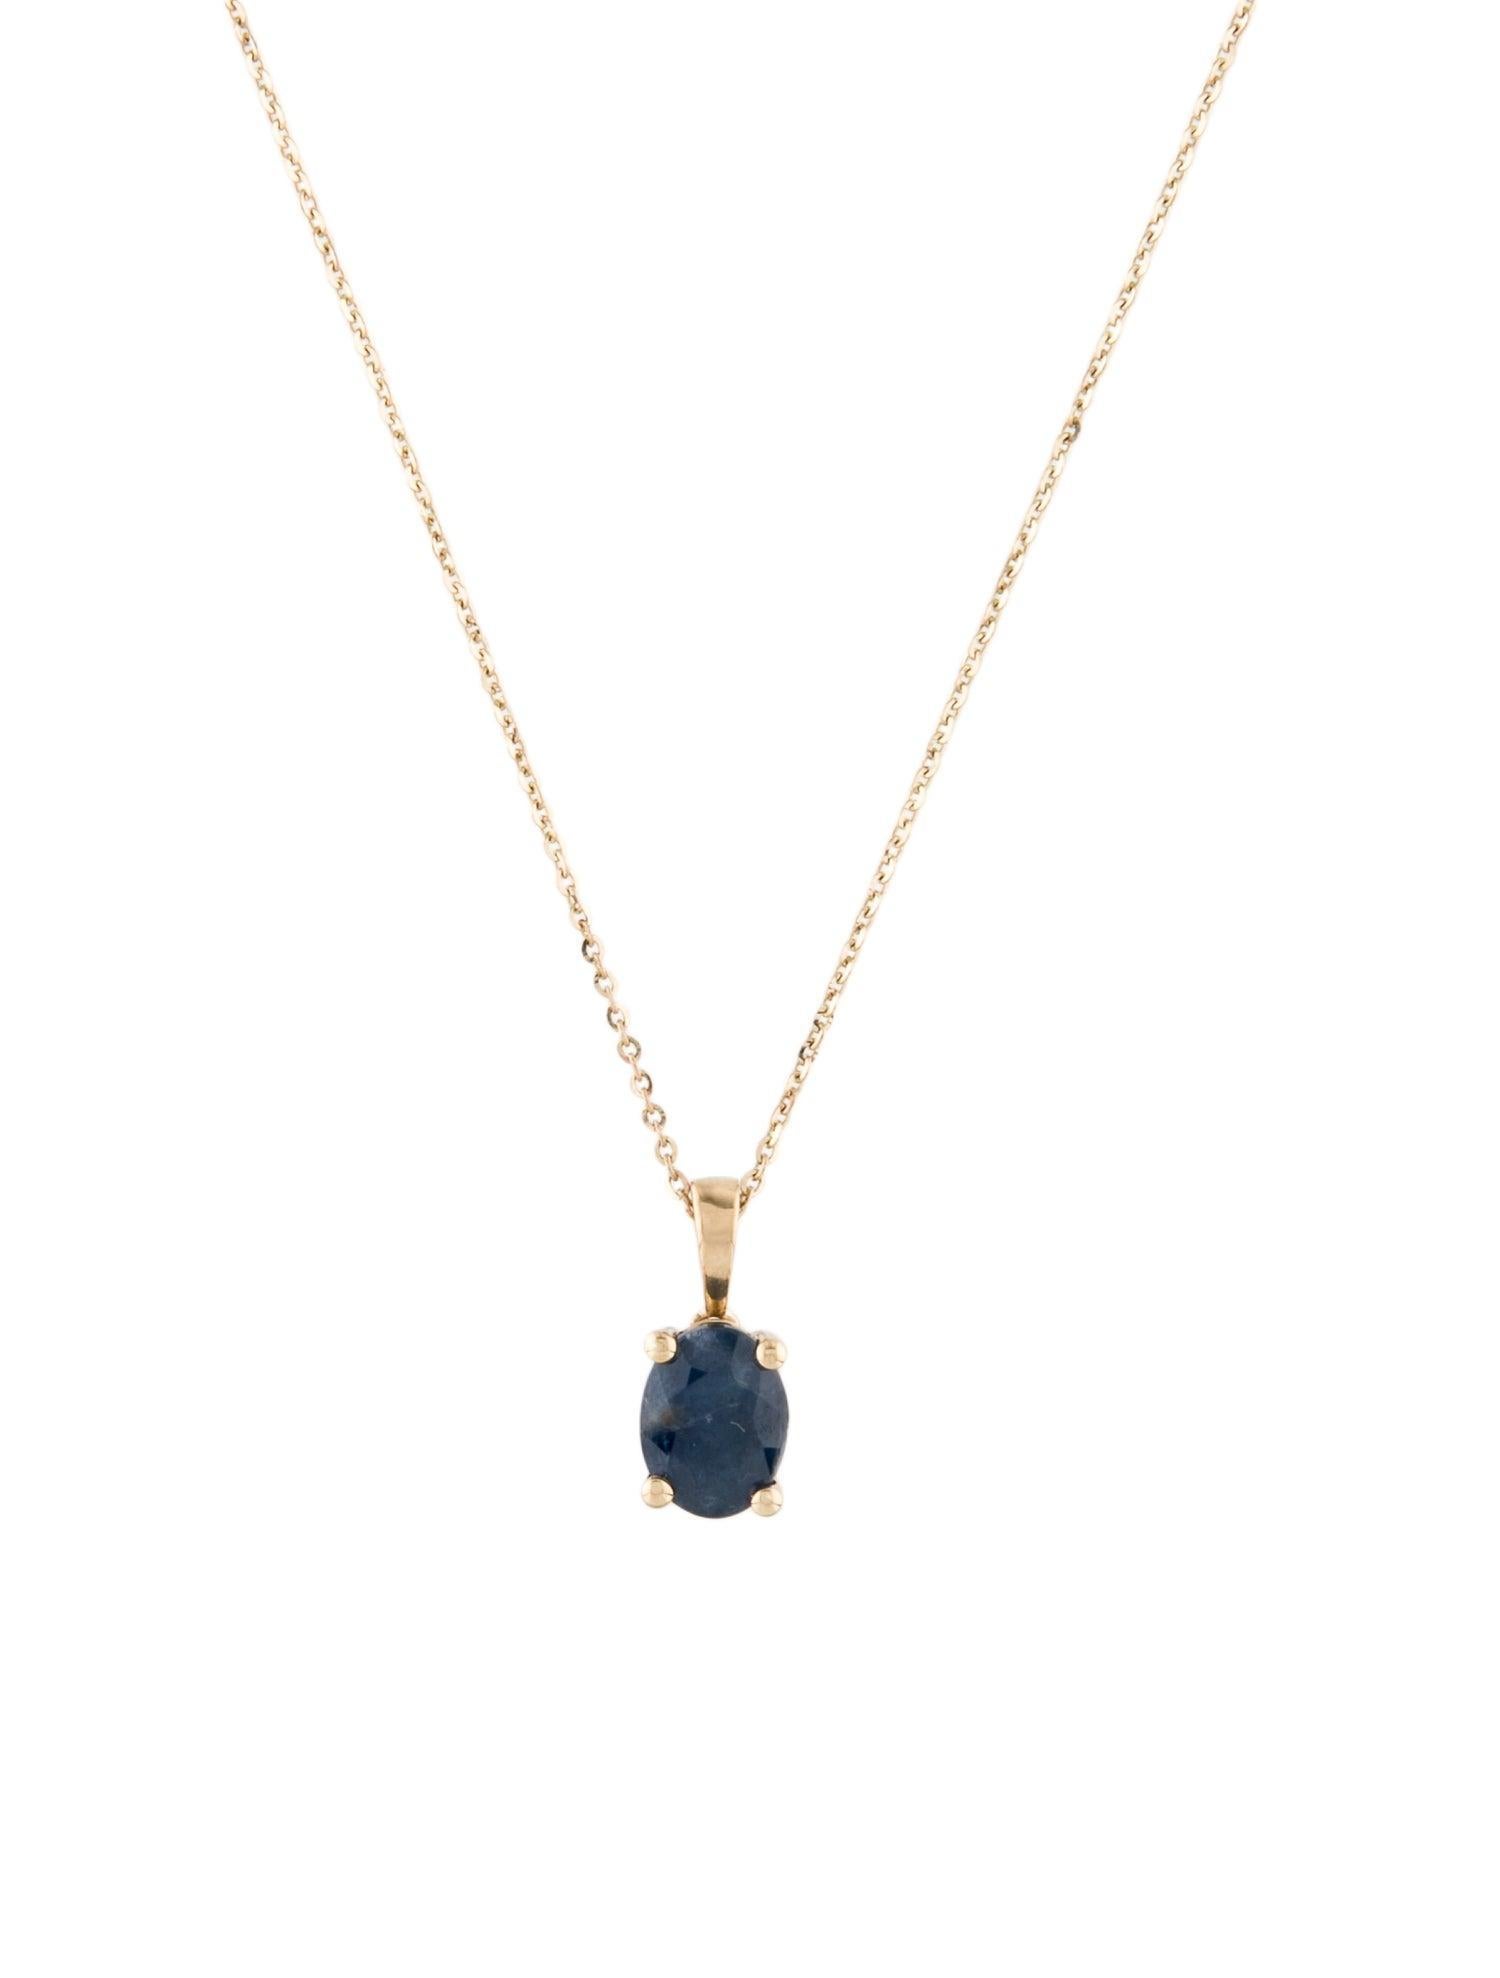 Stunning 14K Sapphire Pendant Necklace  1.50ct Sparkling Gemstone Accent Piece In New Condition For Sale In Holtsville, NY